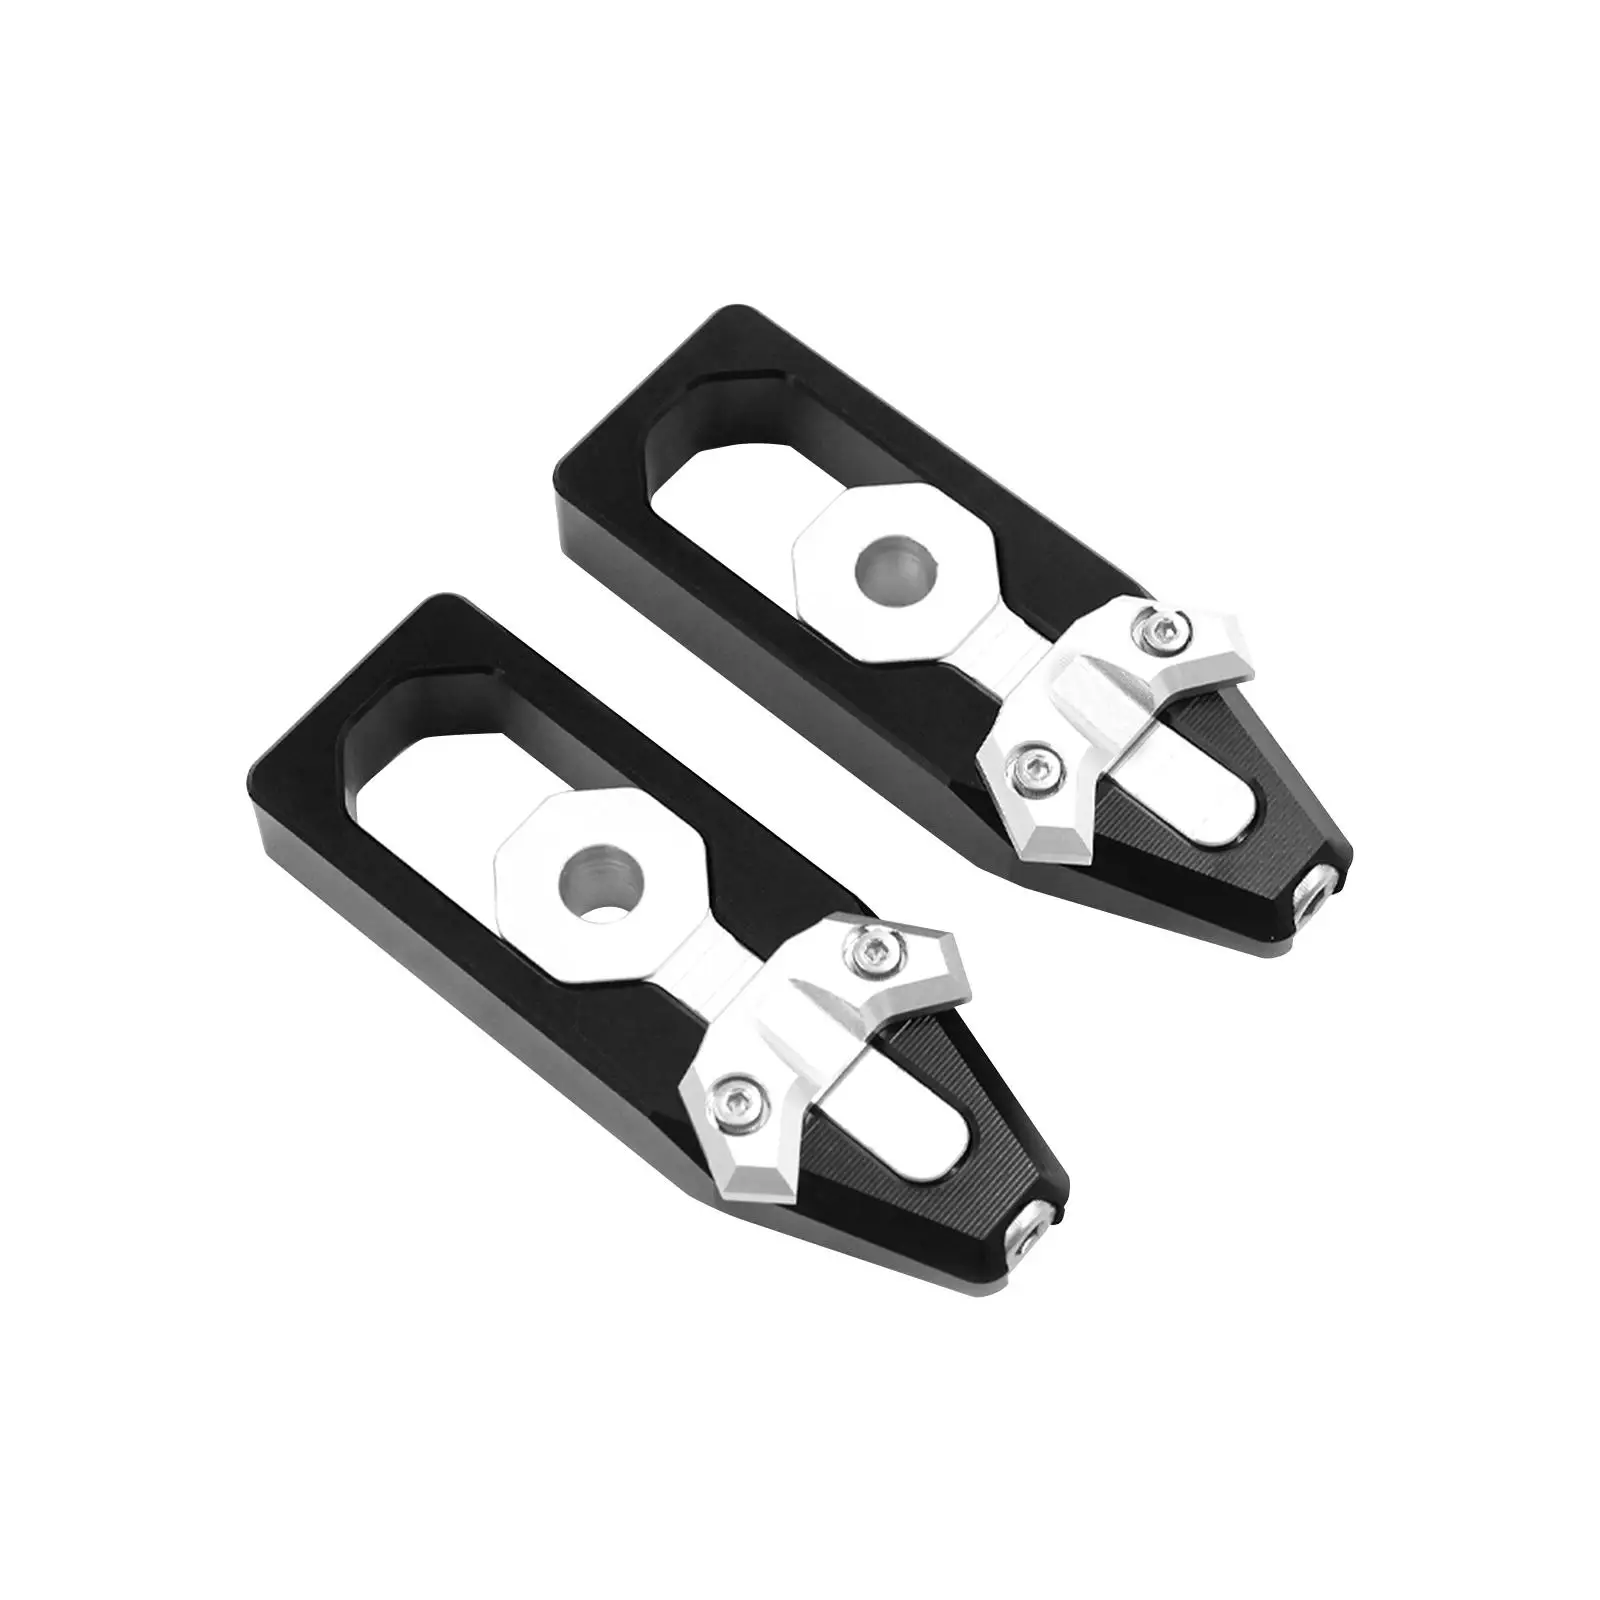 2x Chain Tensioner Simple Installation Professional Aluminum Alloy Motor Chain Adjuster set For honda 2014-2020 Grom